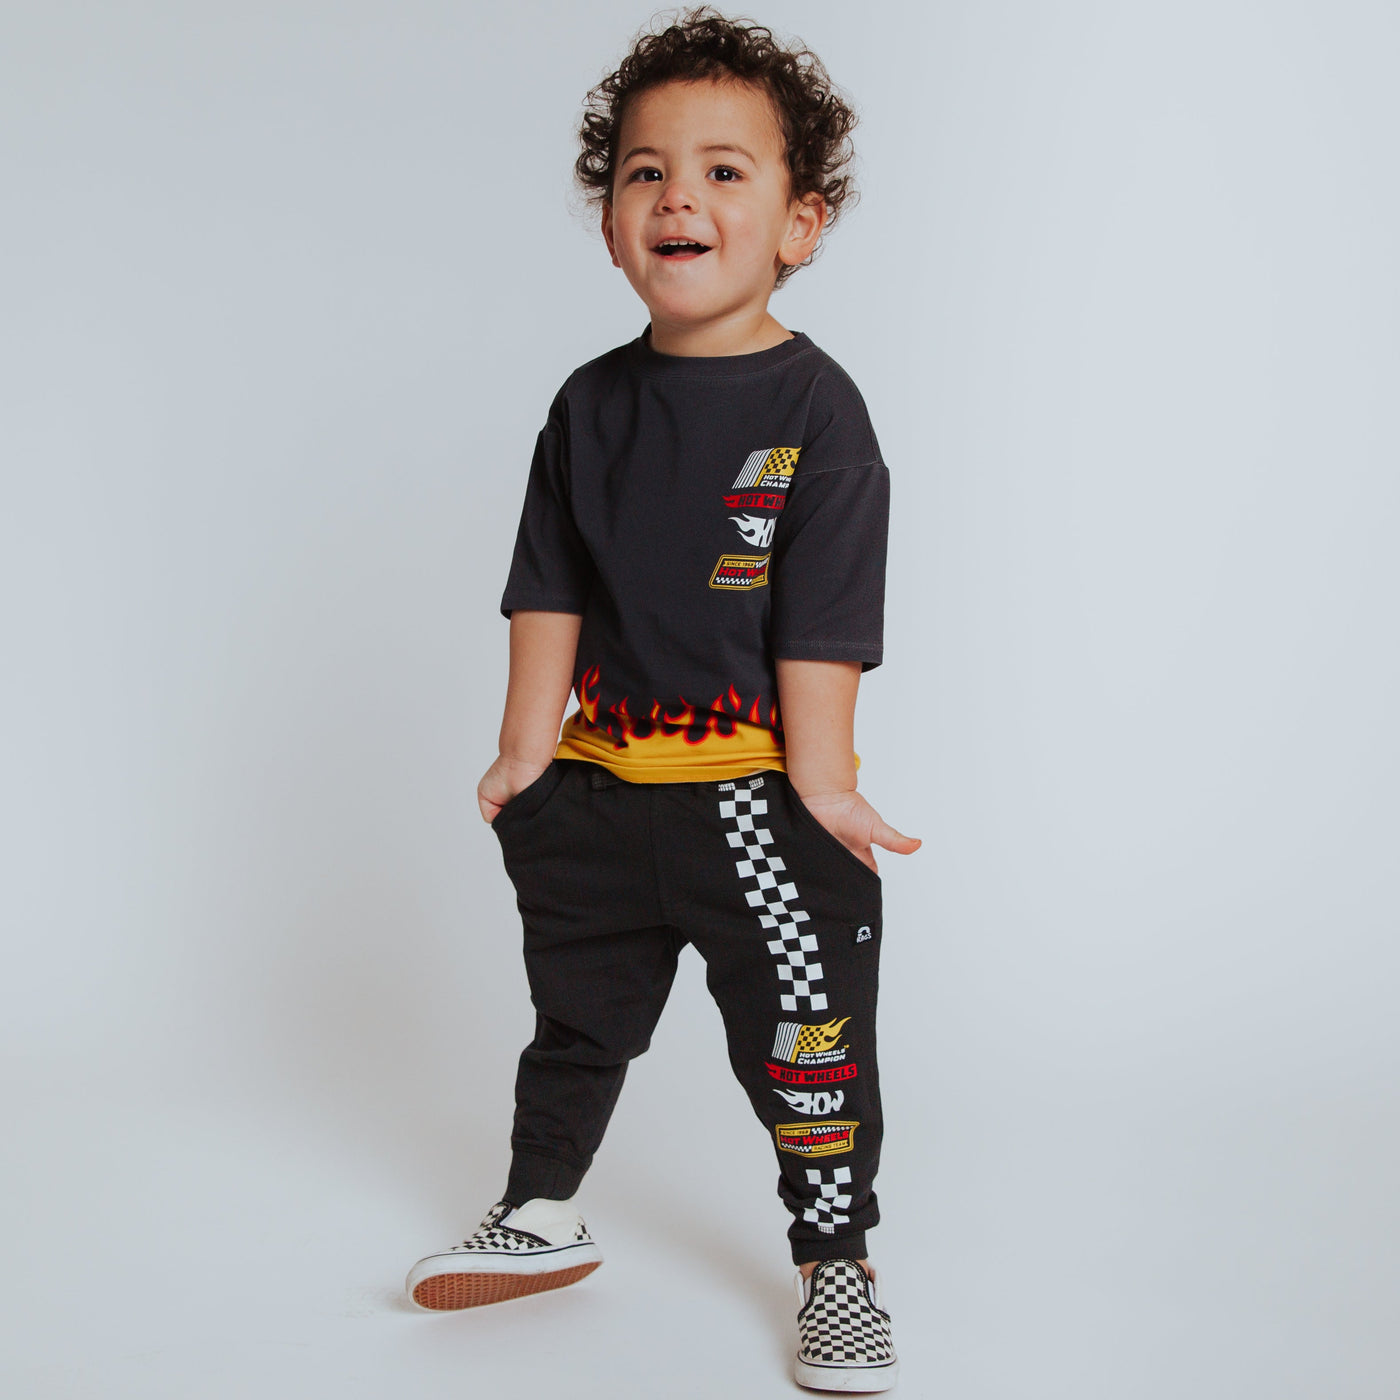 ***PREORDER*** Relaxed Fit Joggers - Hotwheels™